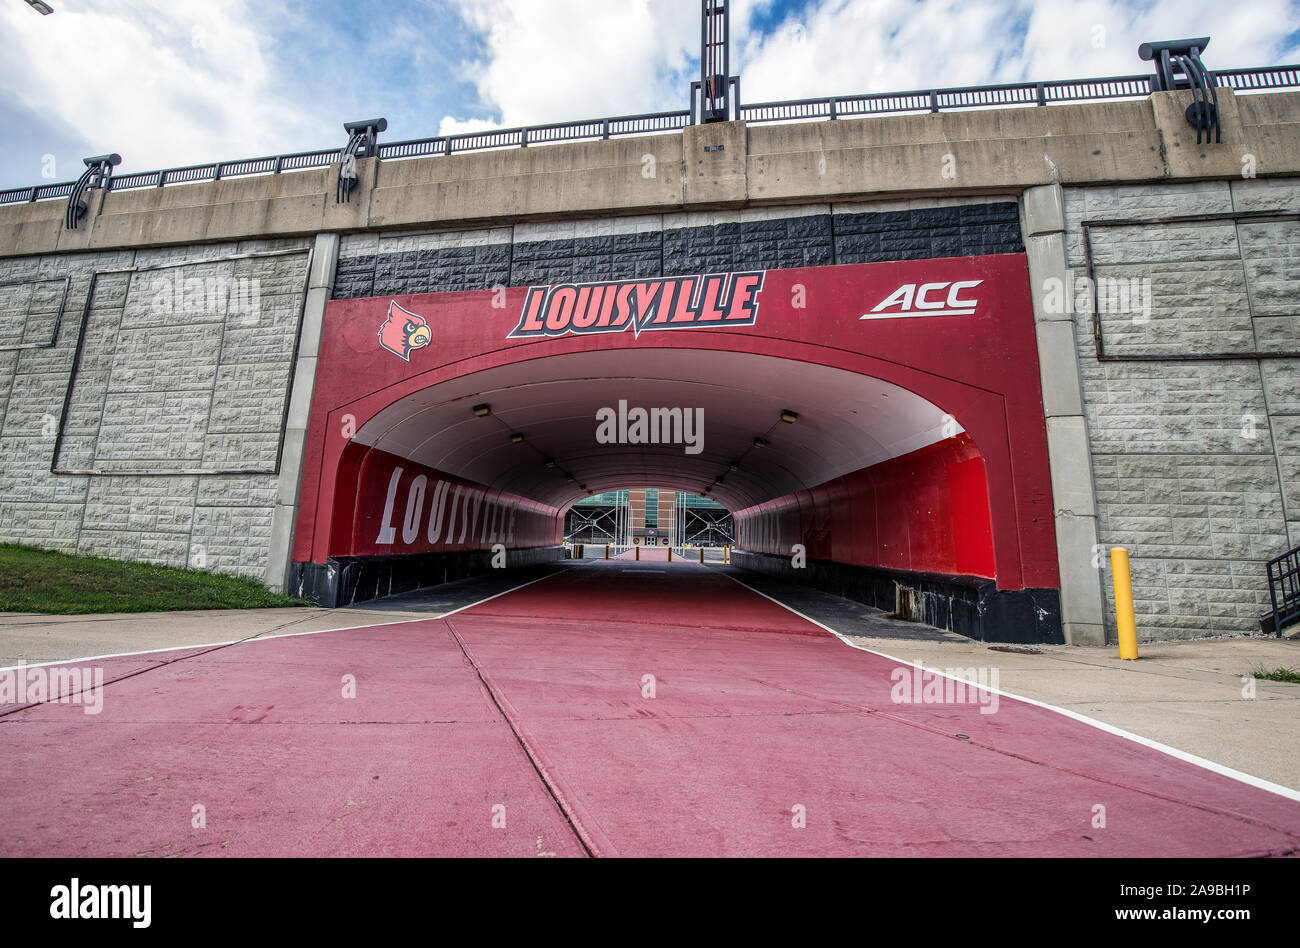 The University of Louisville Papa John's Cardinal stadium recently was renovated to be able to reach a capacity of 55,000 for their football team. Stock Photo